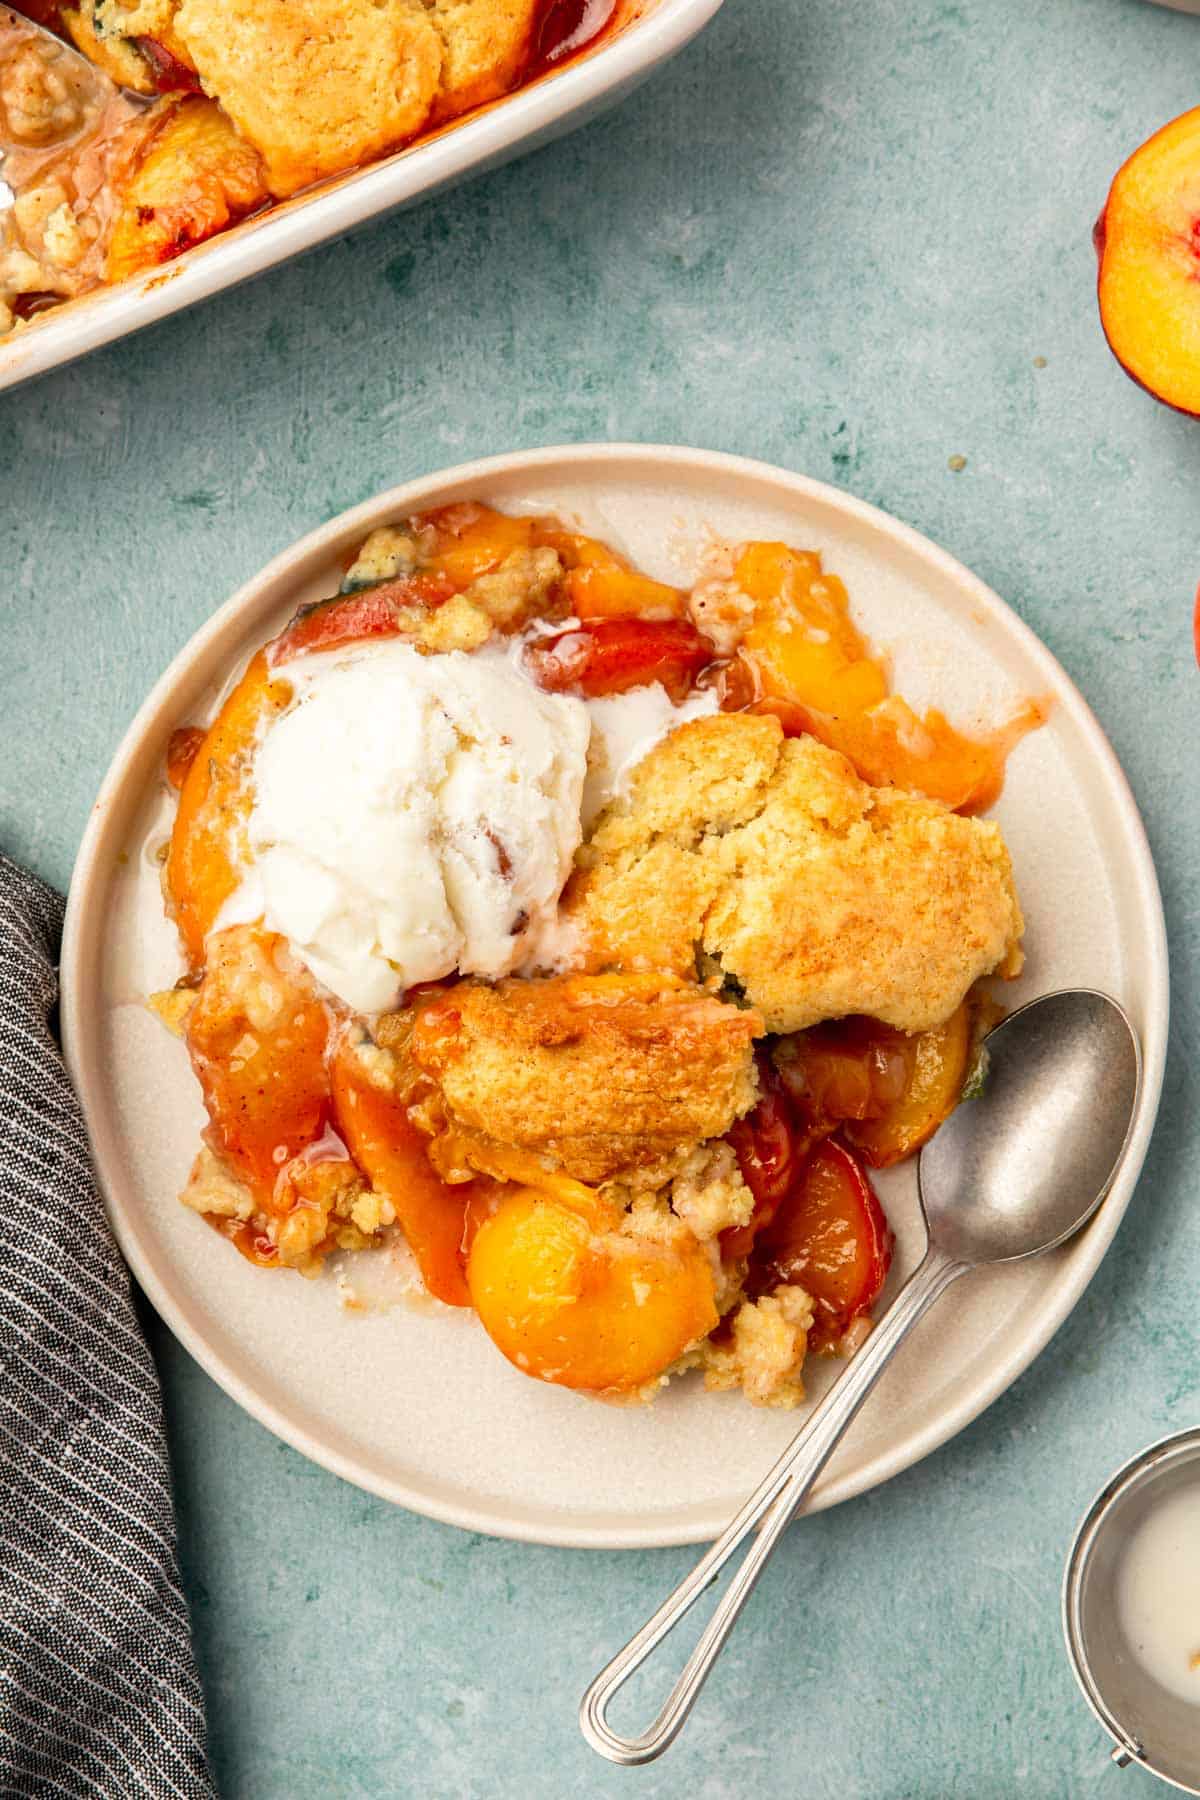 An overhead view of a plate of peach cobbler topped with ice cream with a spoon.